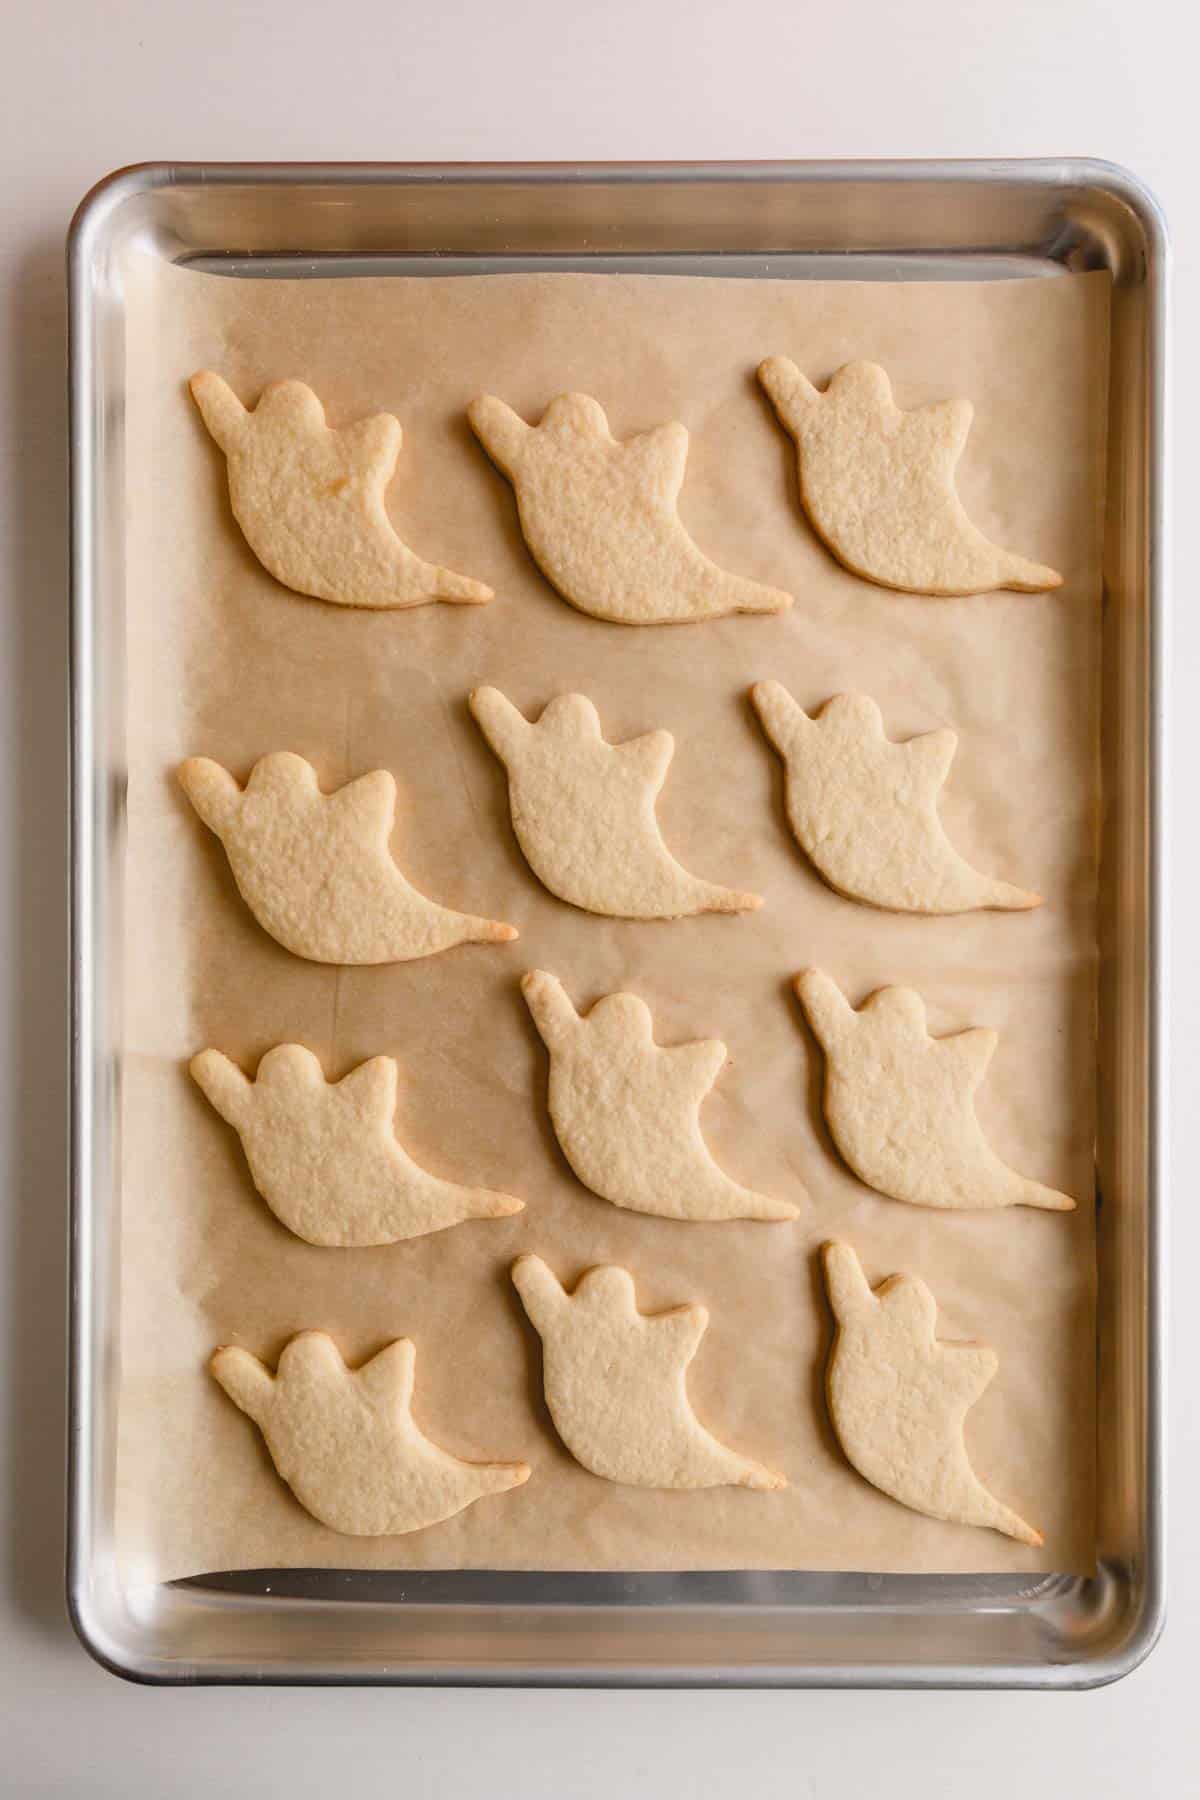 Baked ghost cutout cookies on a baking sheet.